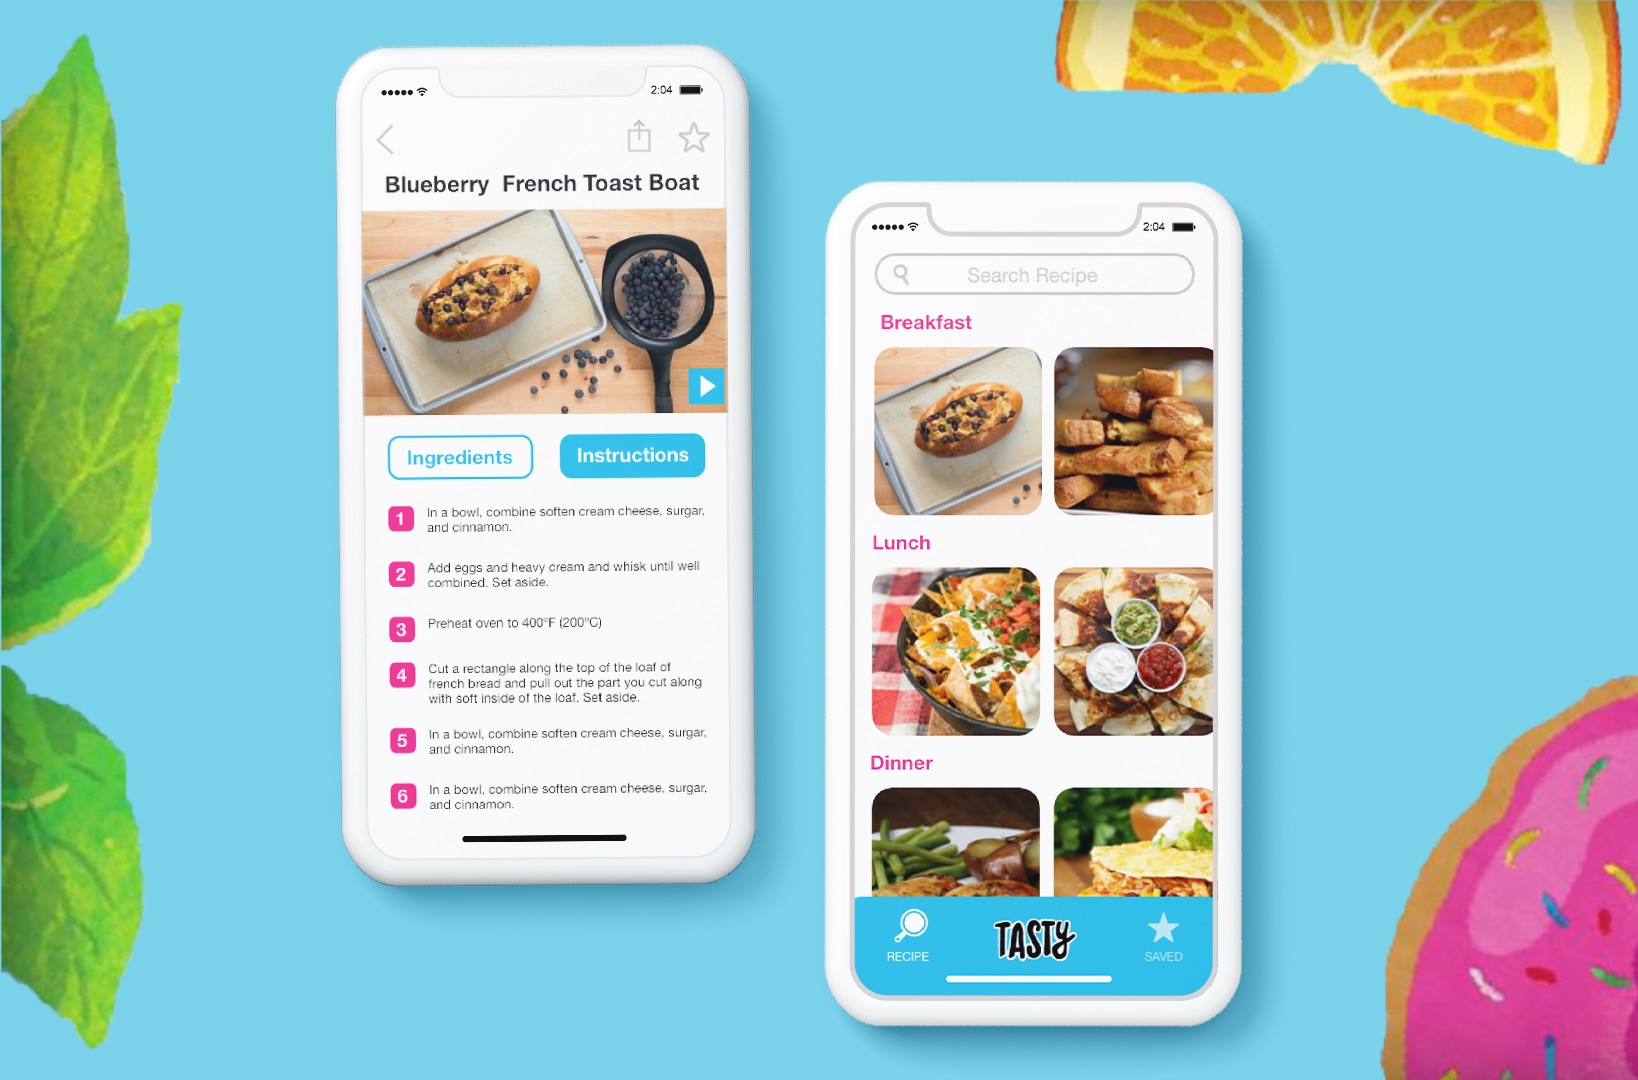 Tasty: Find the Best Recipes with this App